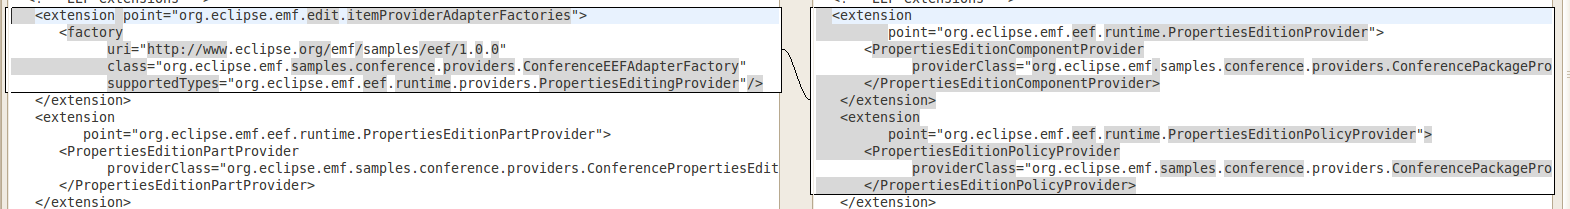 Replaced old EEF providers by the generated AdapterFactory